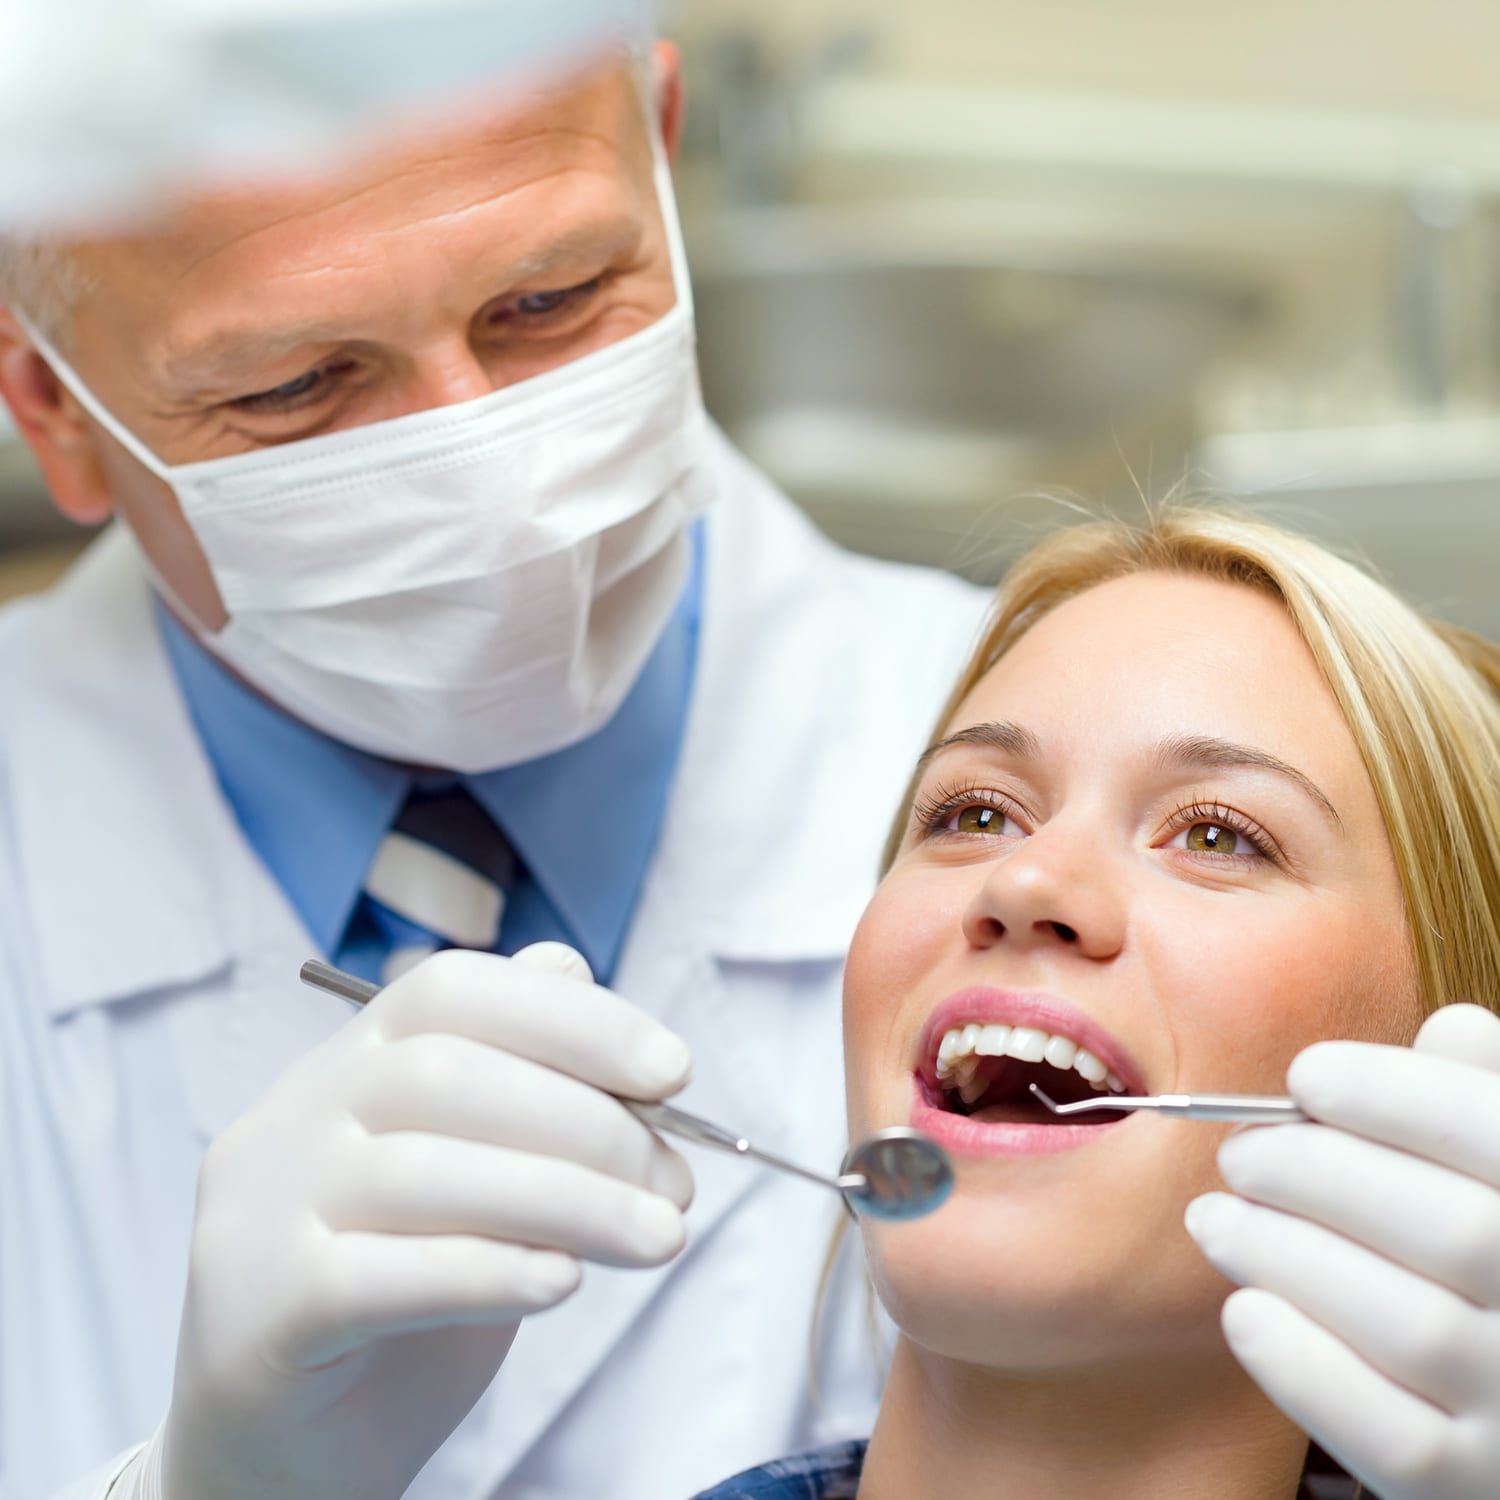 Benefits of Going Regularly to the Jacksonville Dentist